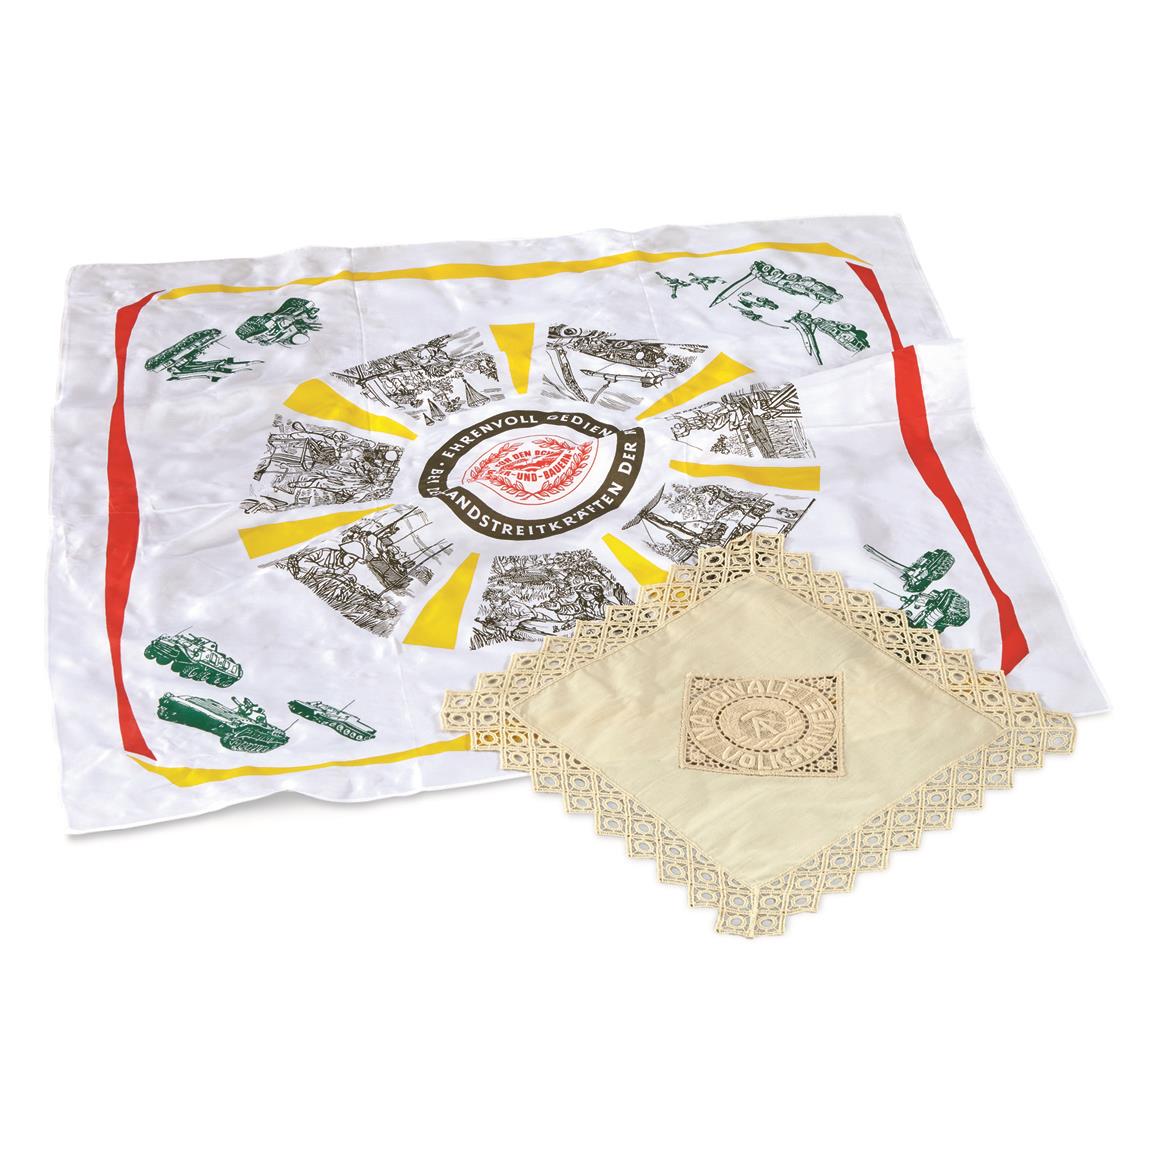 East German Military NVA Commemorative Scarf and Doily Set, 4 Pack, New